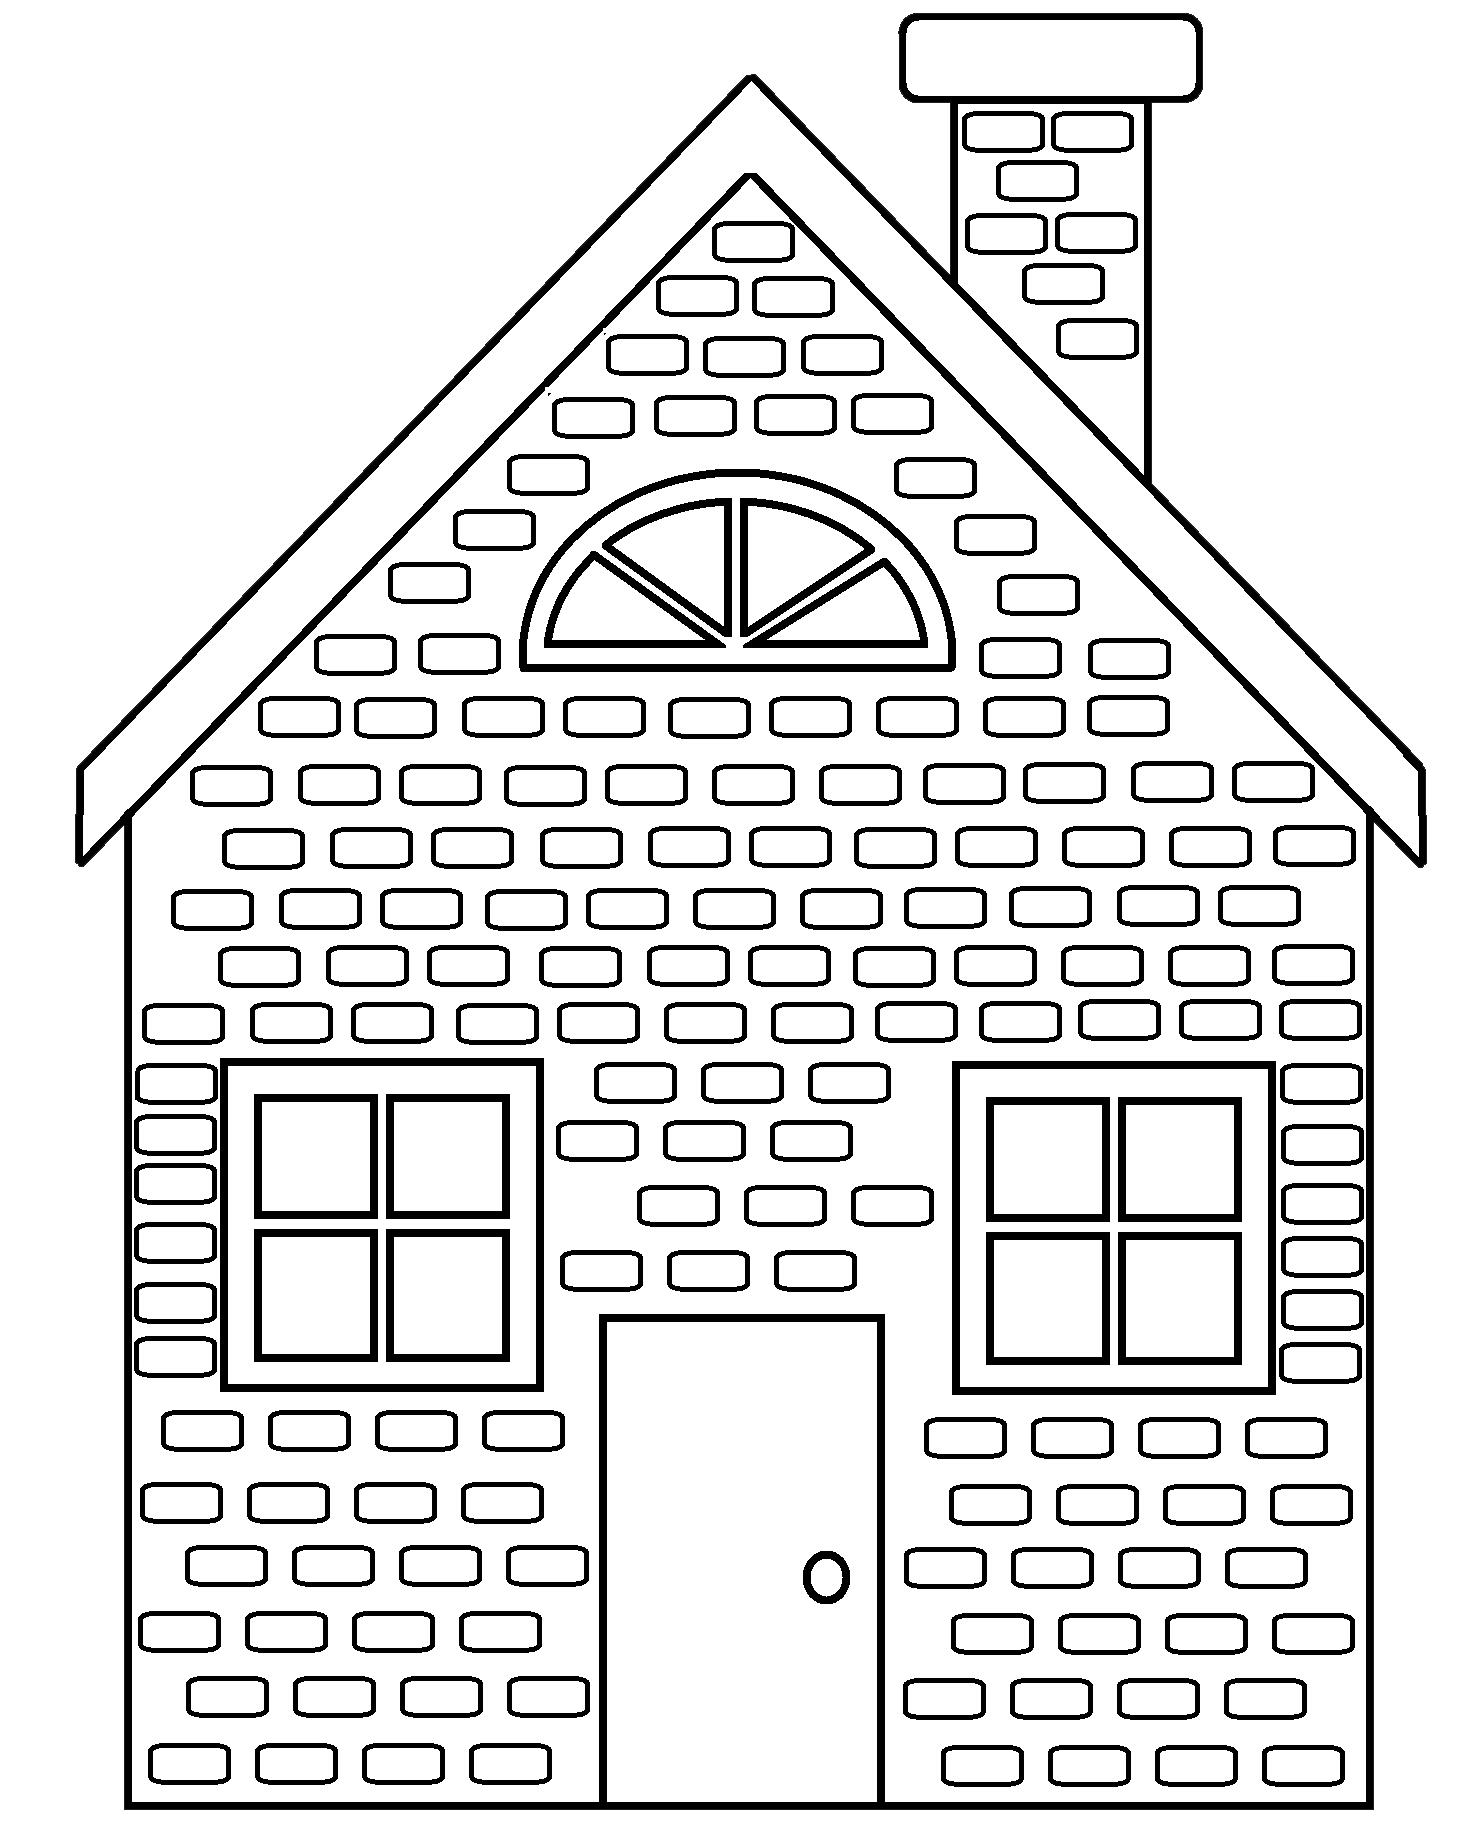 9 Pics of Brick House Coloring Page - 3 Little Pigs Brick House ...